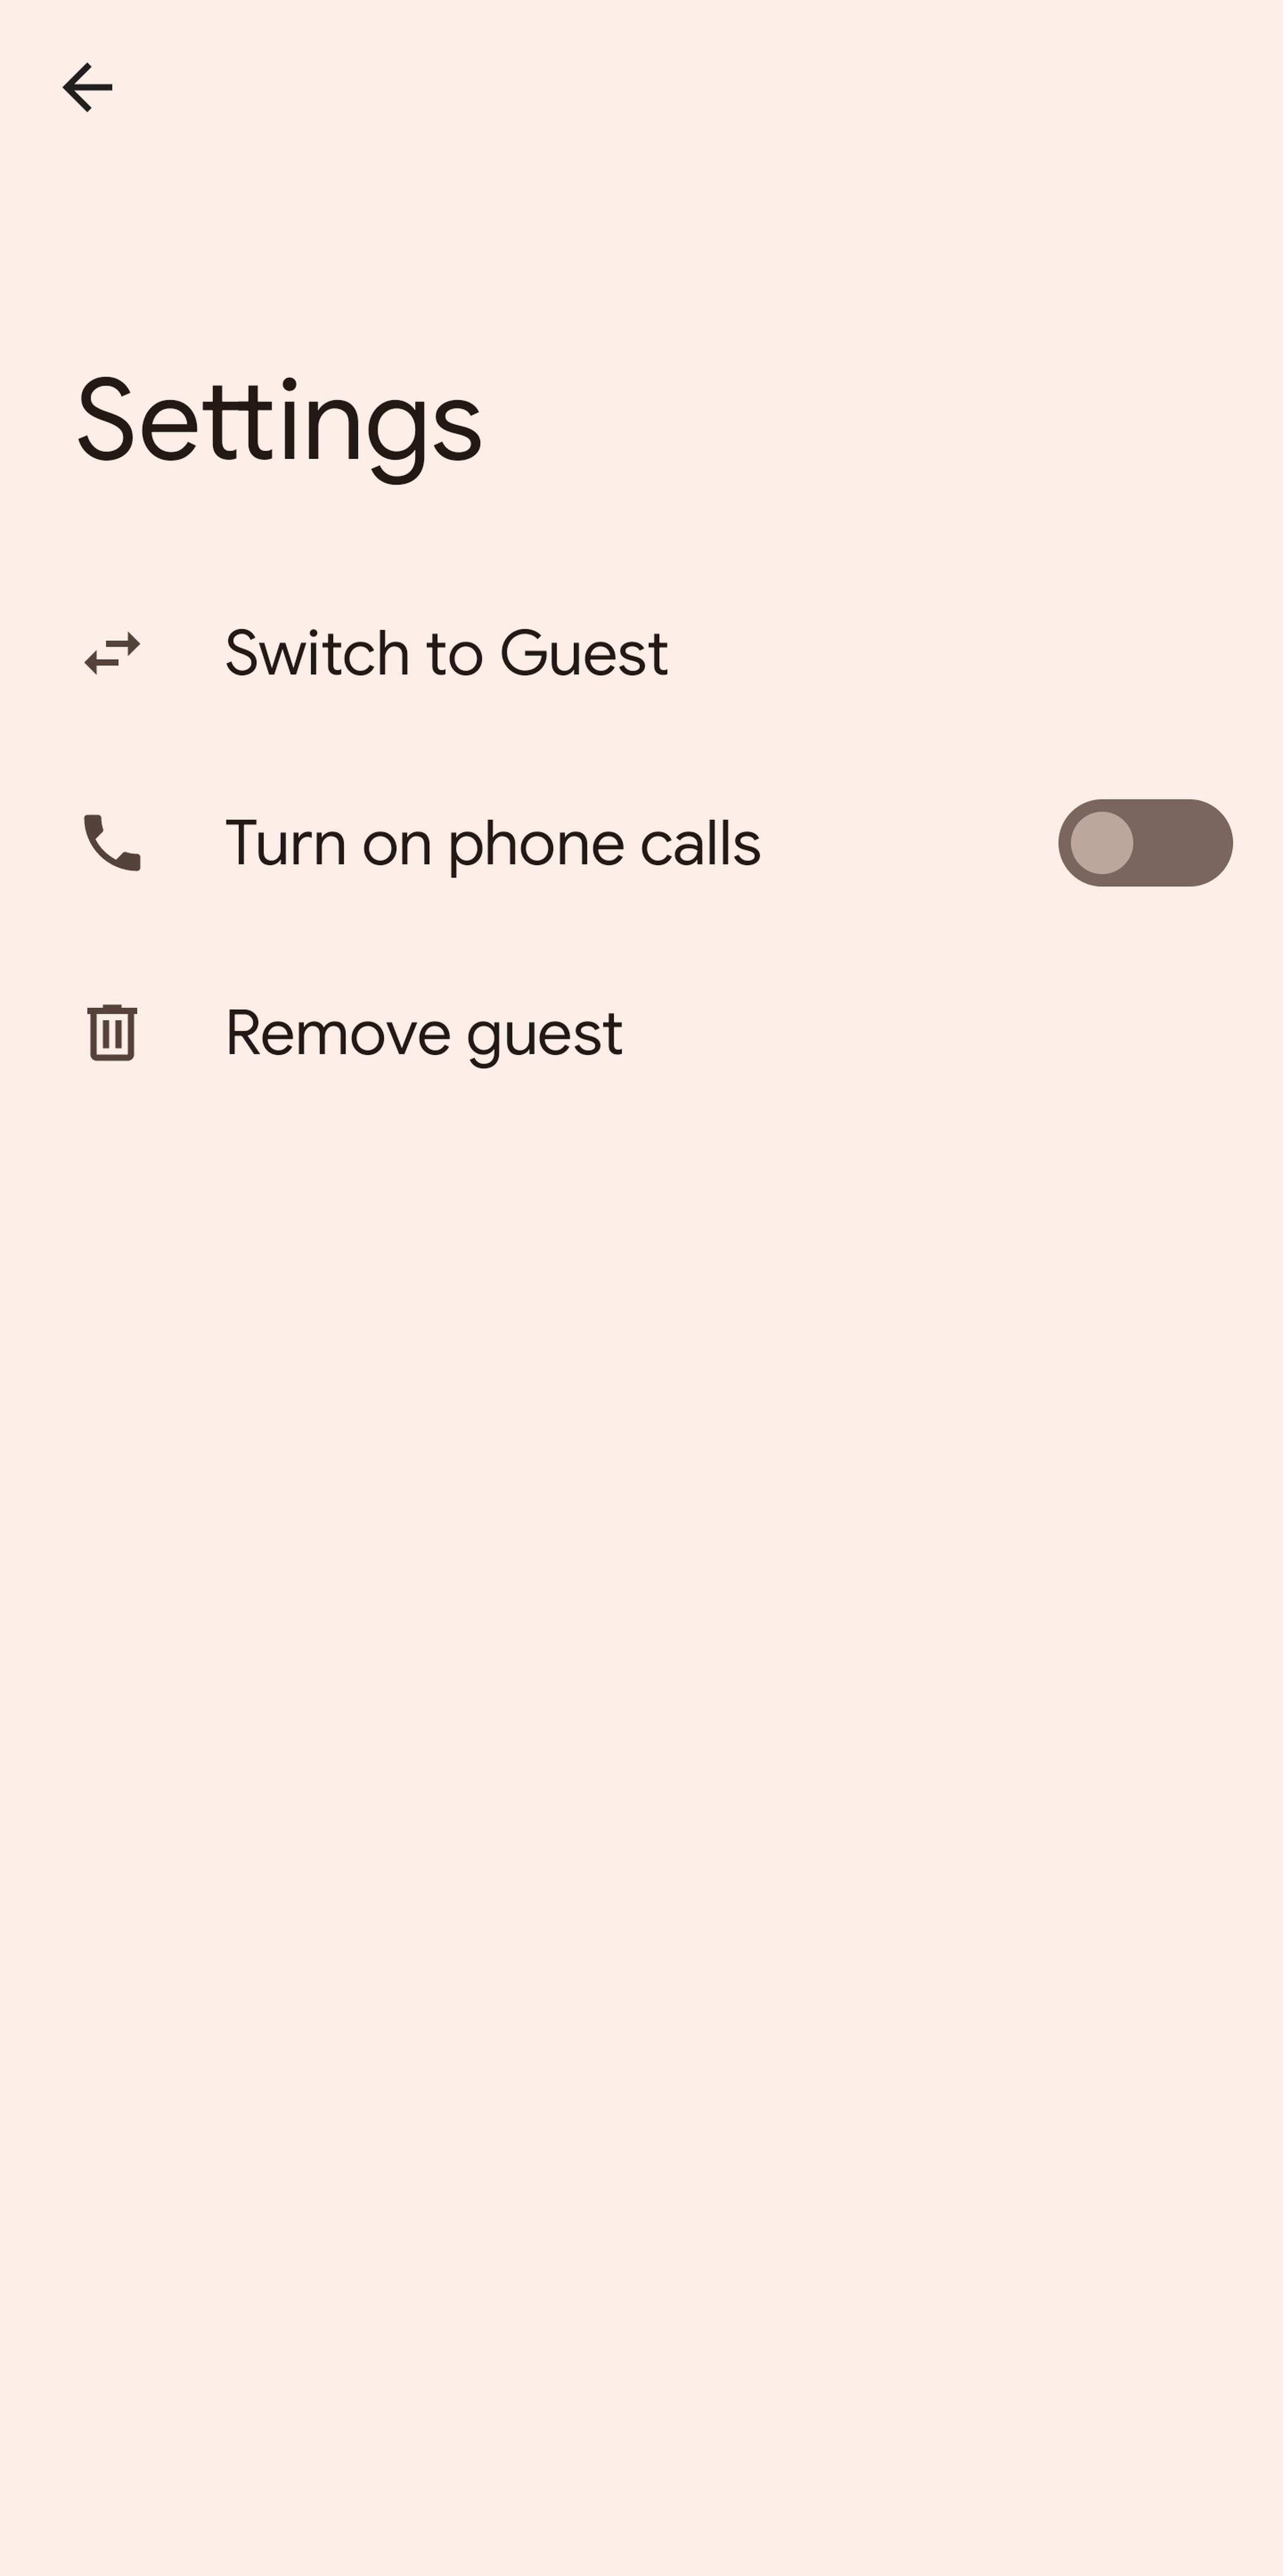 Mobile screen headed Settings and including three choices: Switch to Guest, Turn on phone calls, and Remove guest.